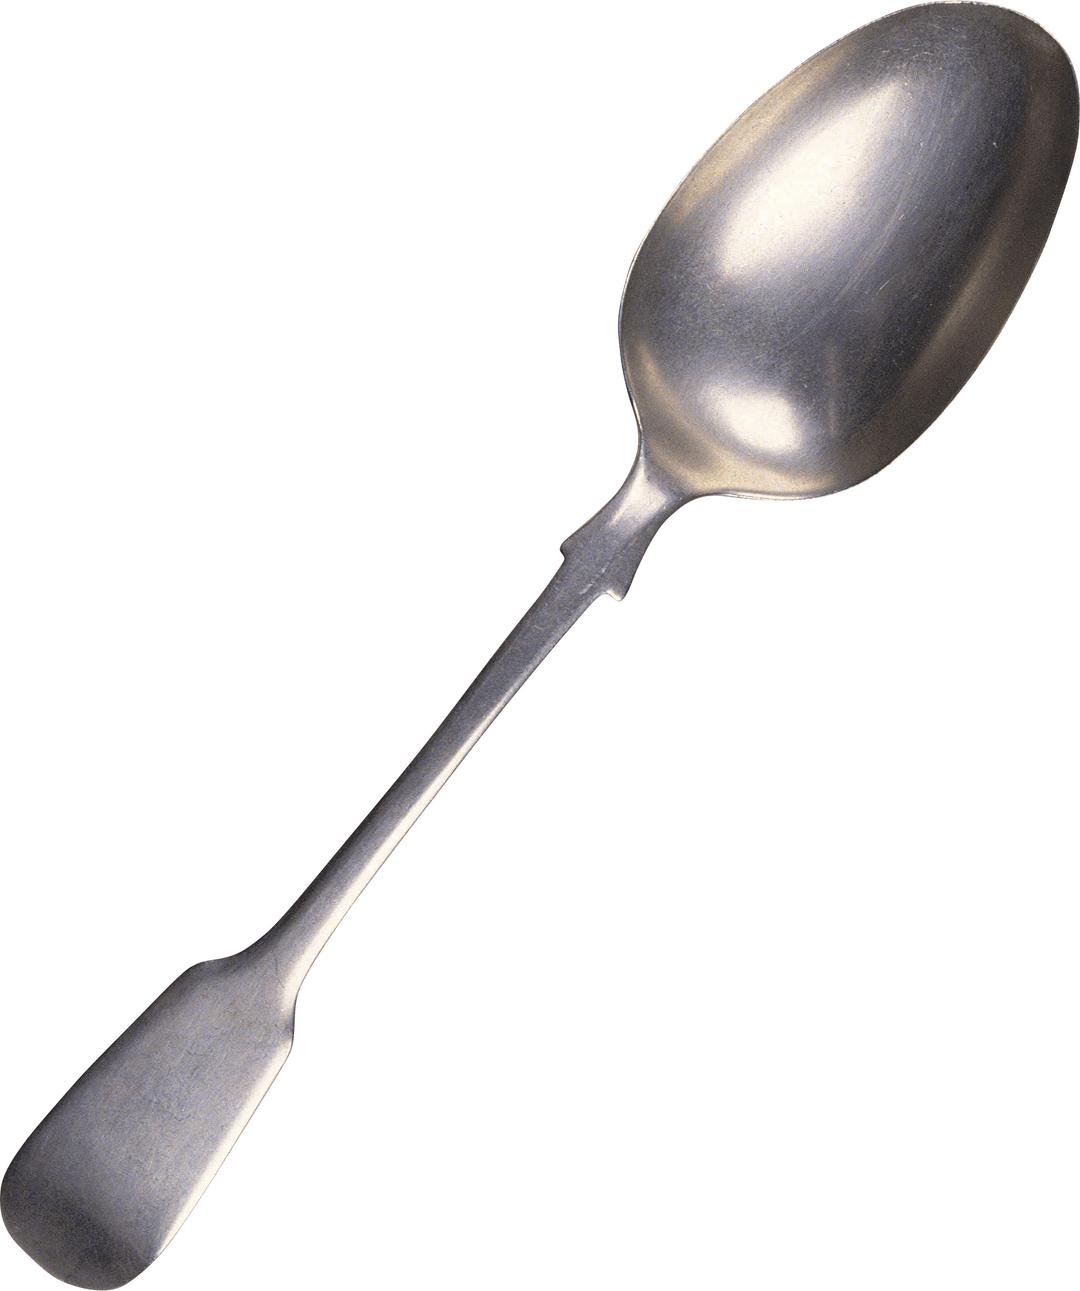 Old Spoon png transparent